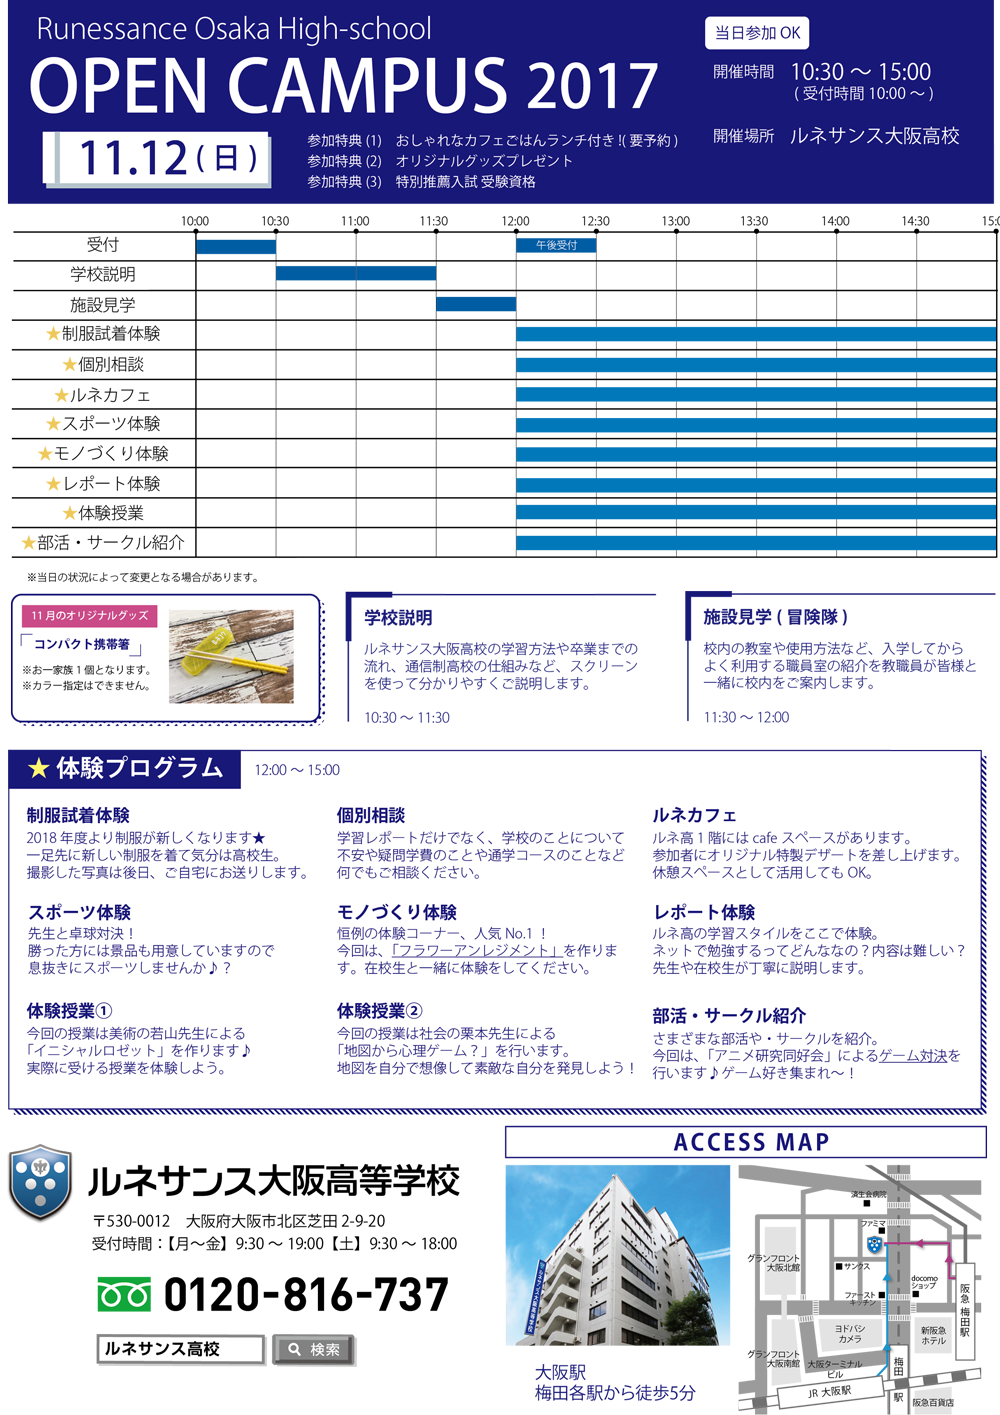 http://www.r-ac.jp/campus/osaka/blog/img/2017OC_timetable1112.png